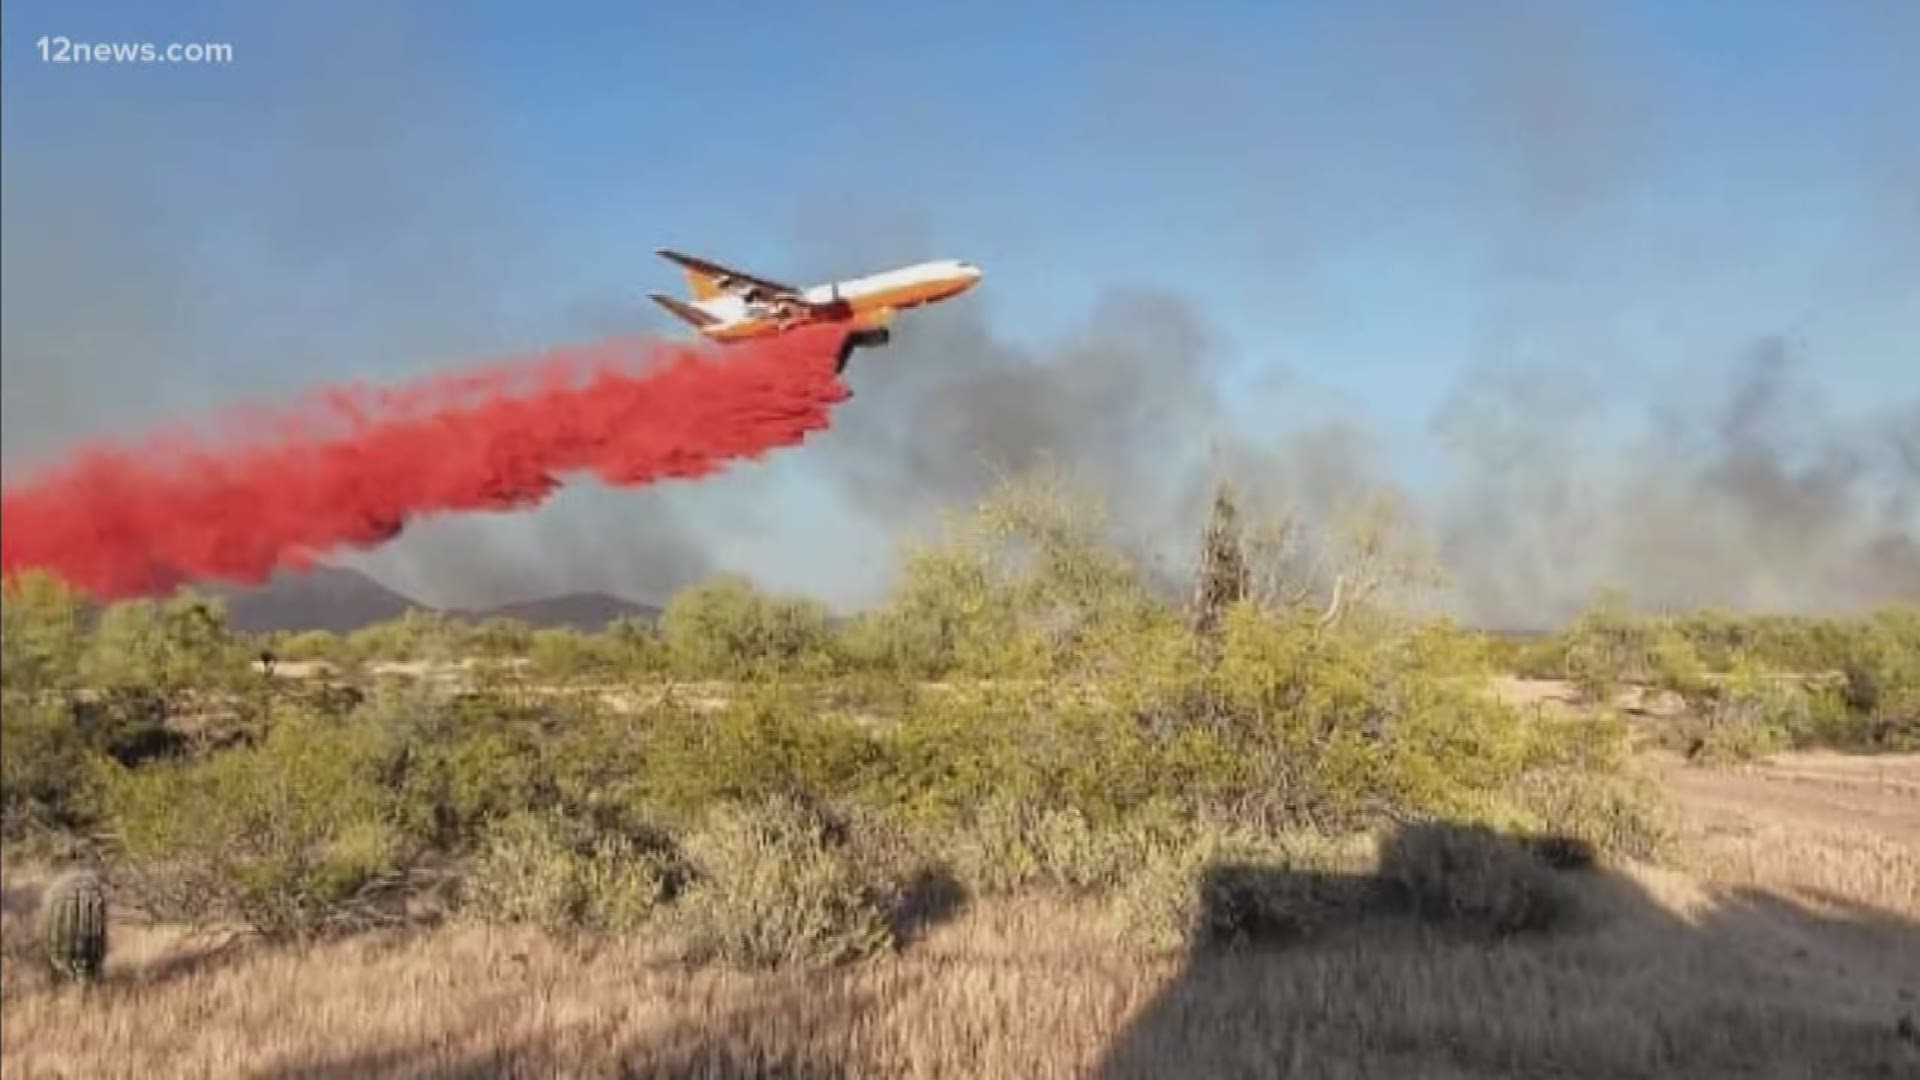 A forest fire is burning near Wittmann. It began Sunday and so far is only 30% contained.